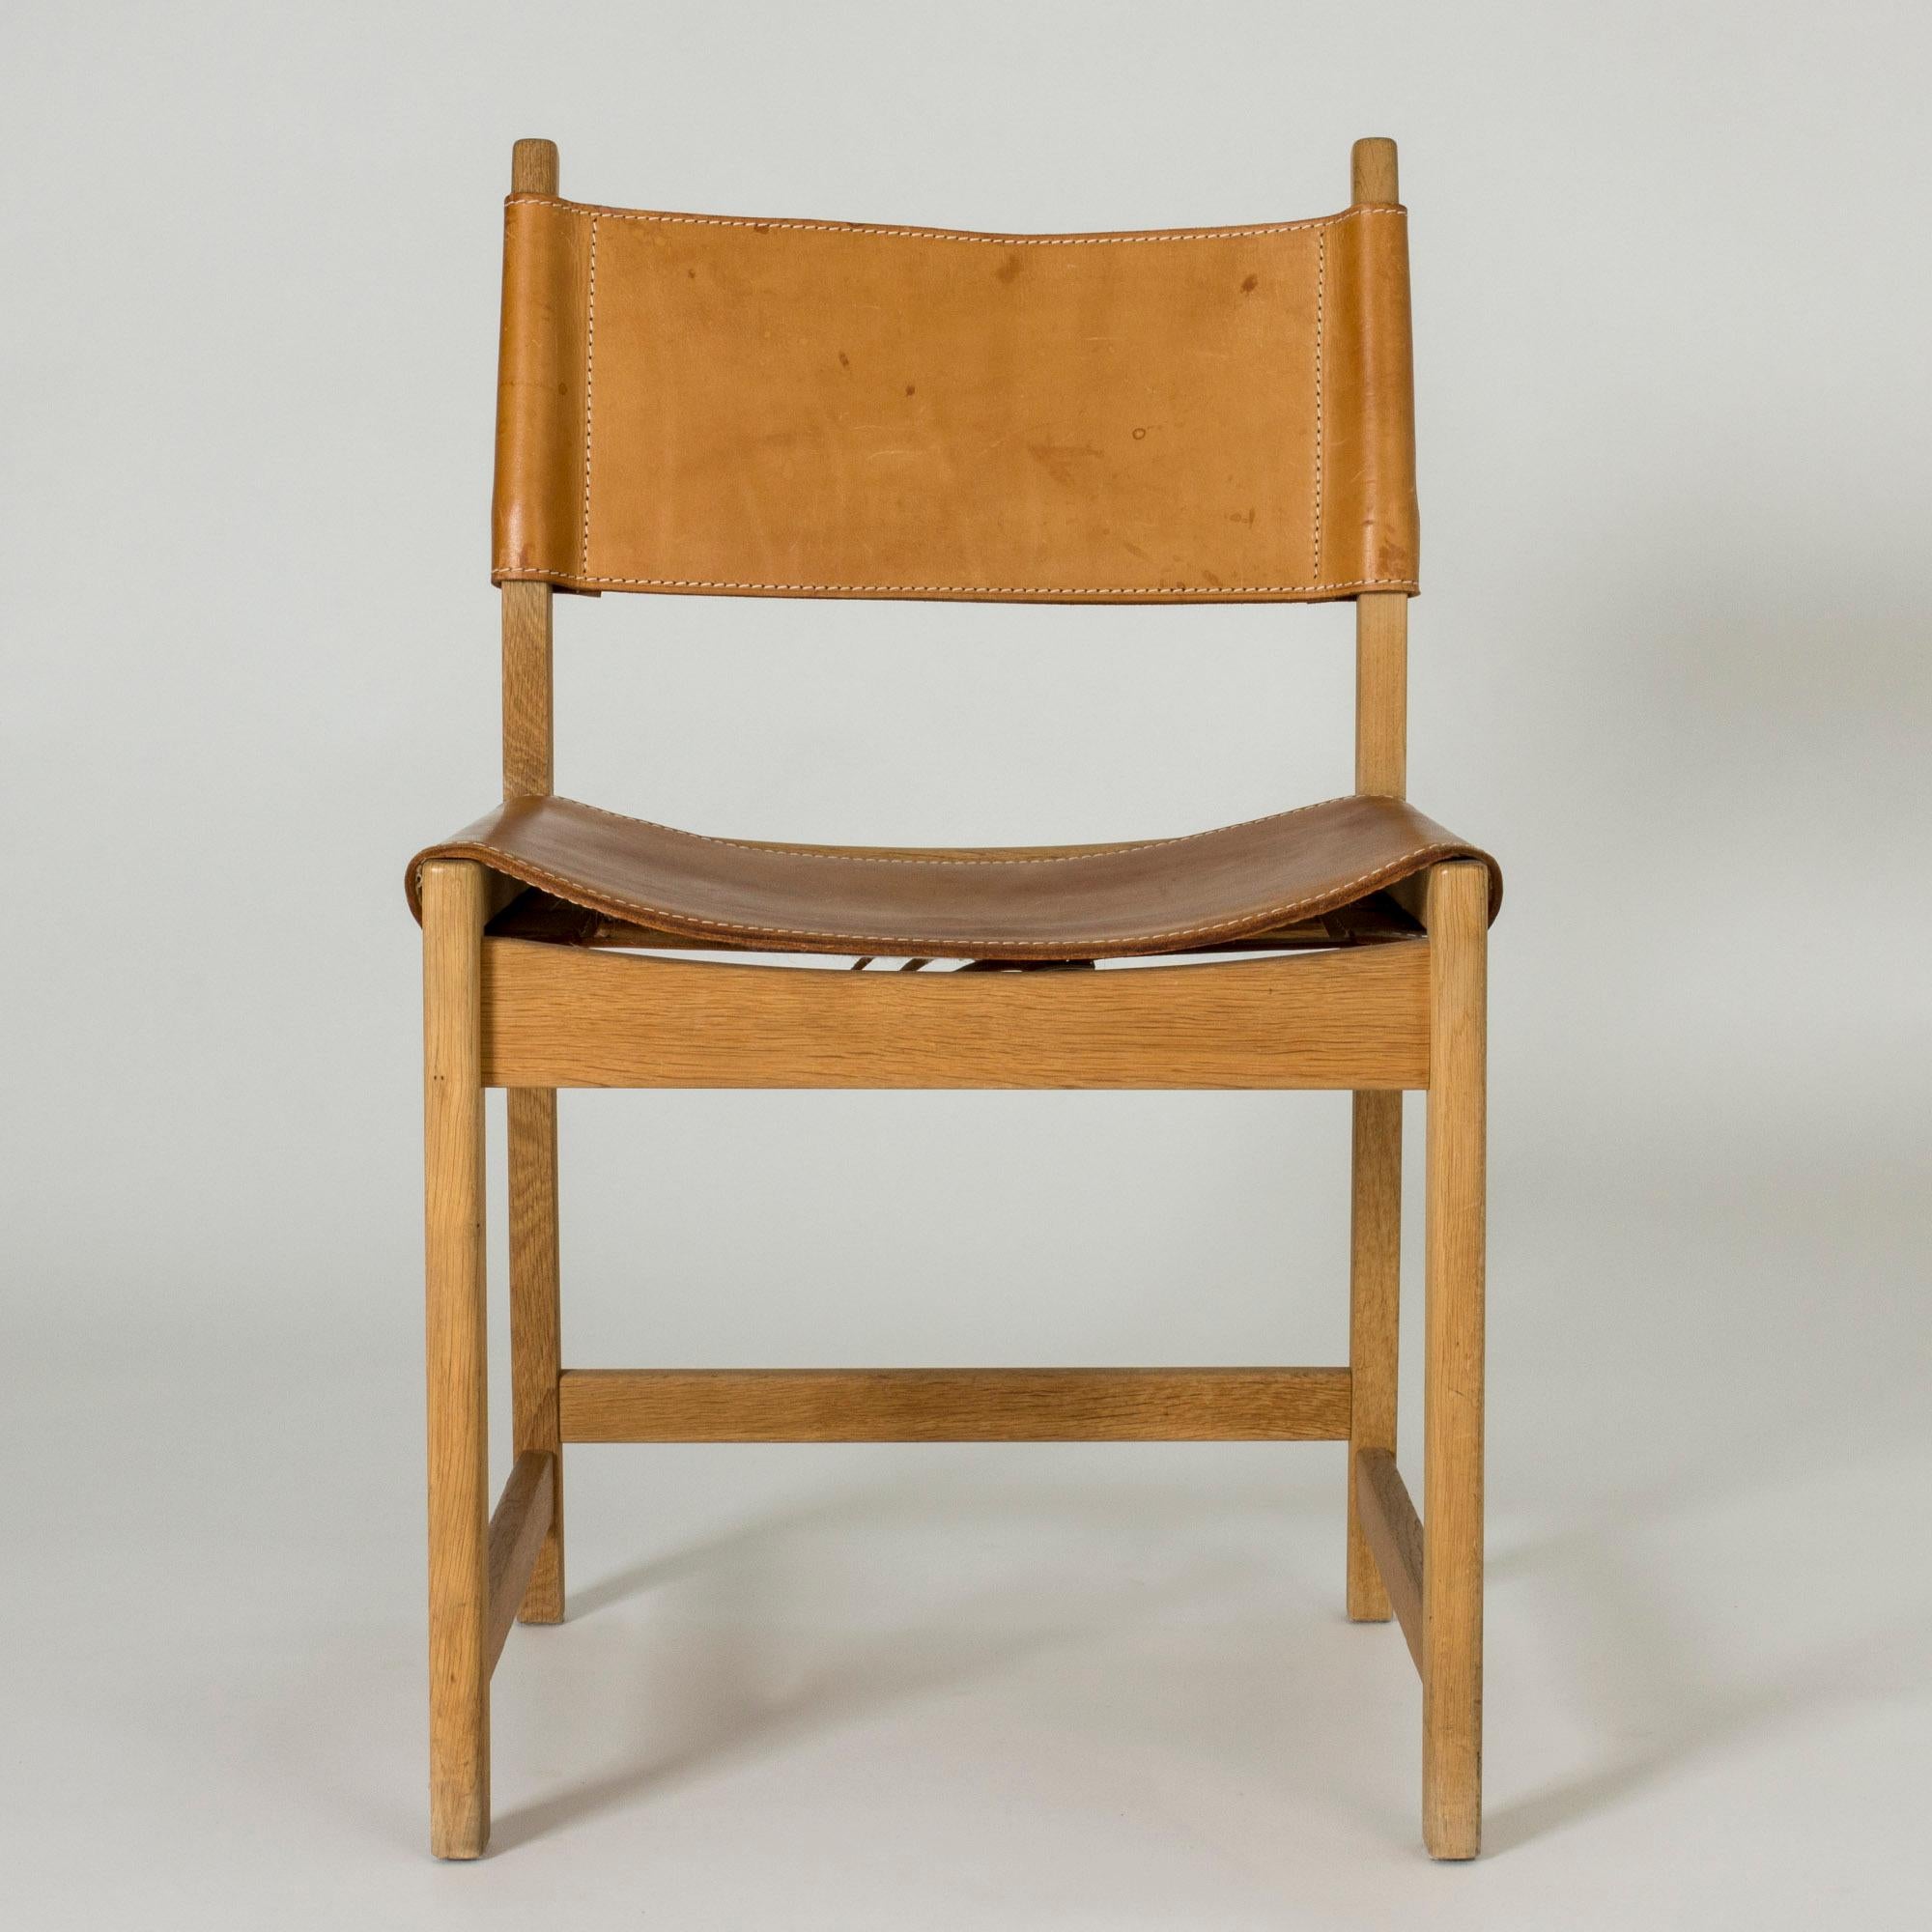 Elegant chair by Kurt Østervig, with a boxy oak silhouette and leather seat and back. Details of white seams on the sturdy, nicely patinated leather.